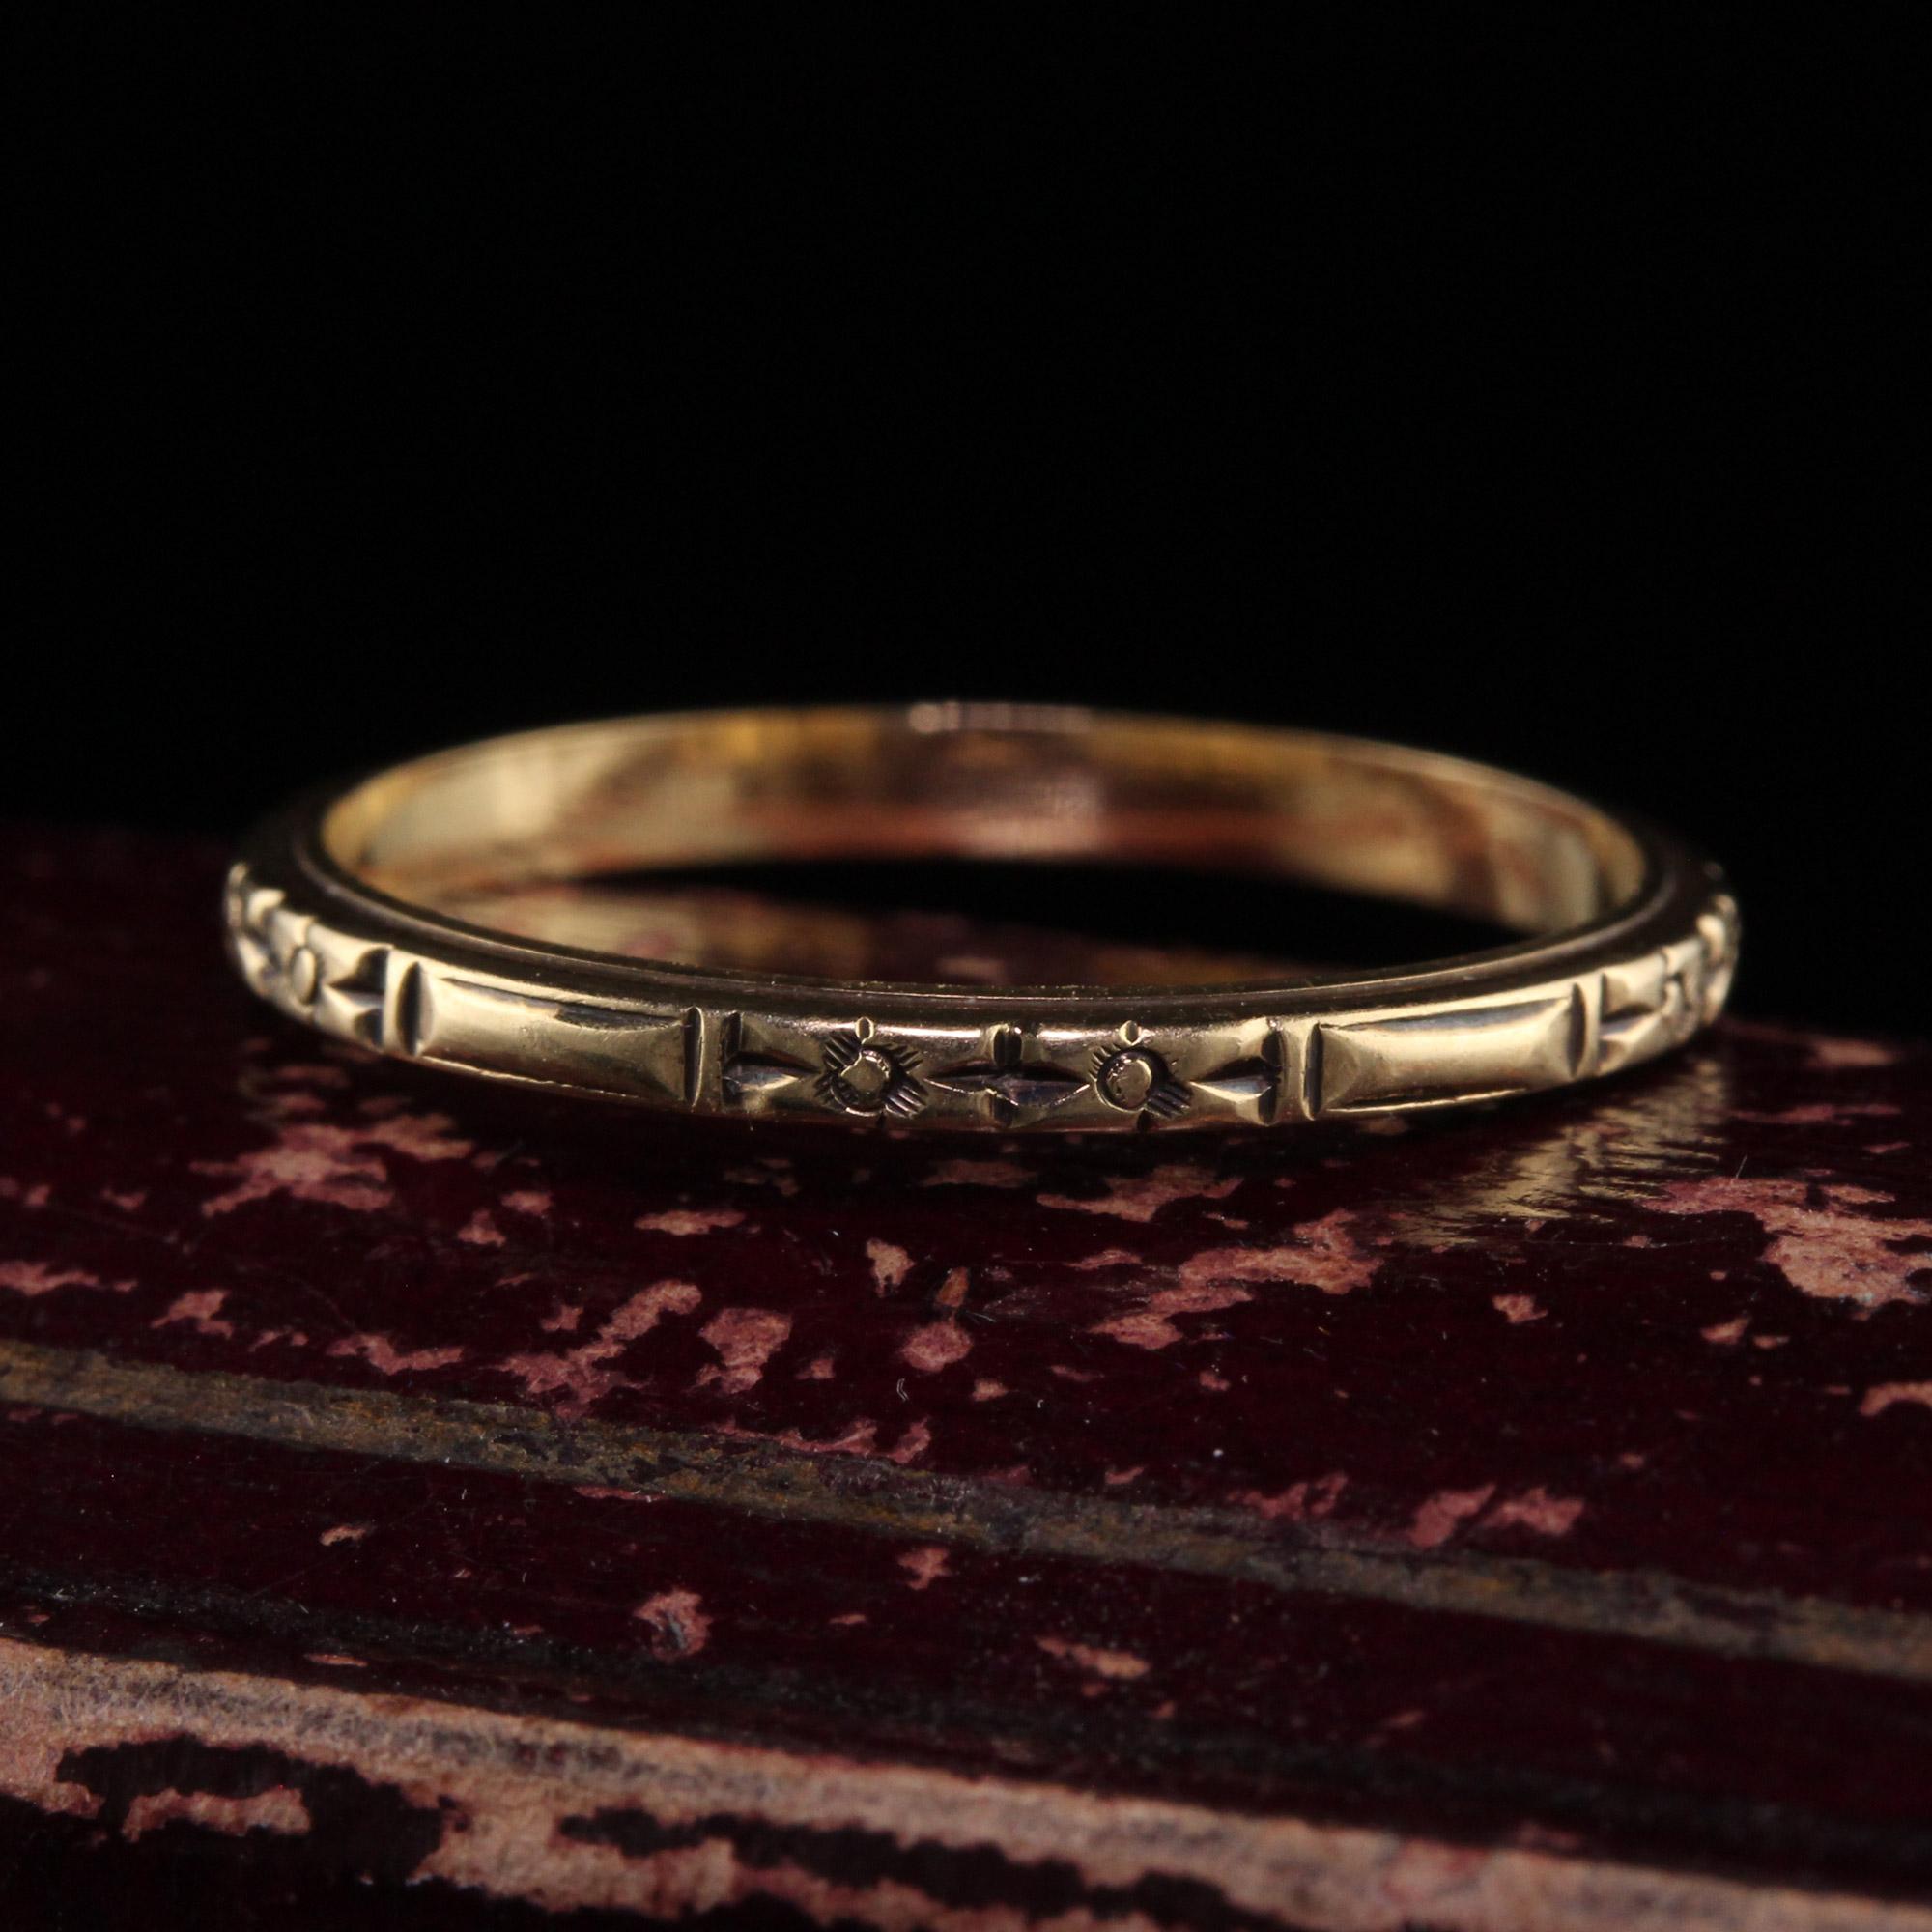 Beautiful Antique Art Deco 14K Yellow Gold Engraved Wedding Band - Size 7. This beautiful band is crafted in 14k yellow gold. The ring is deeply engraved around the entire ring and is in great condition. It is a thin band and can be stacked with